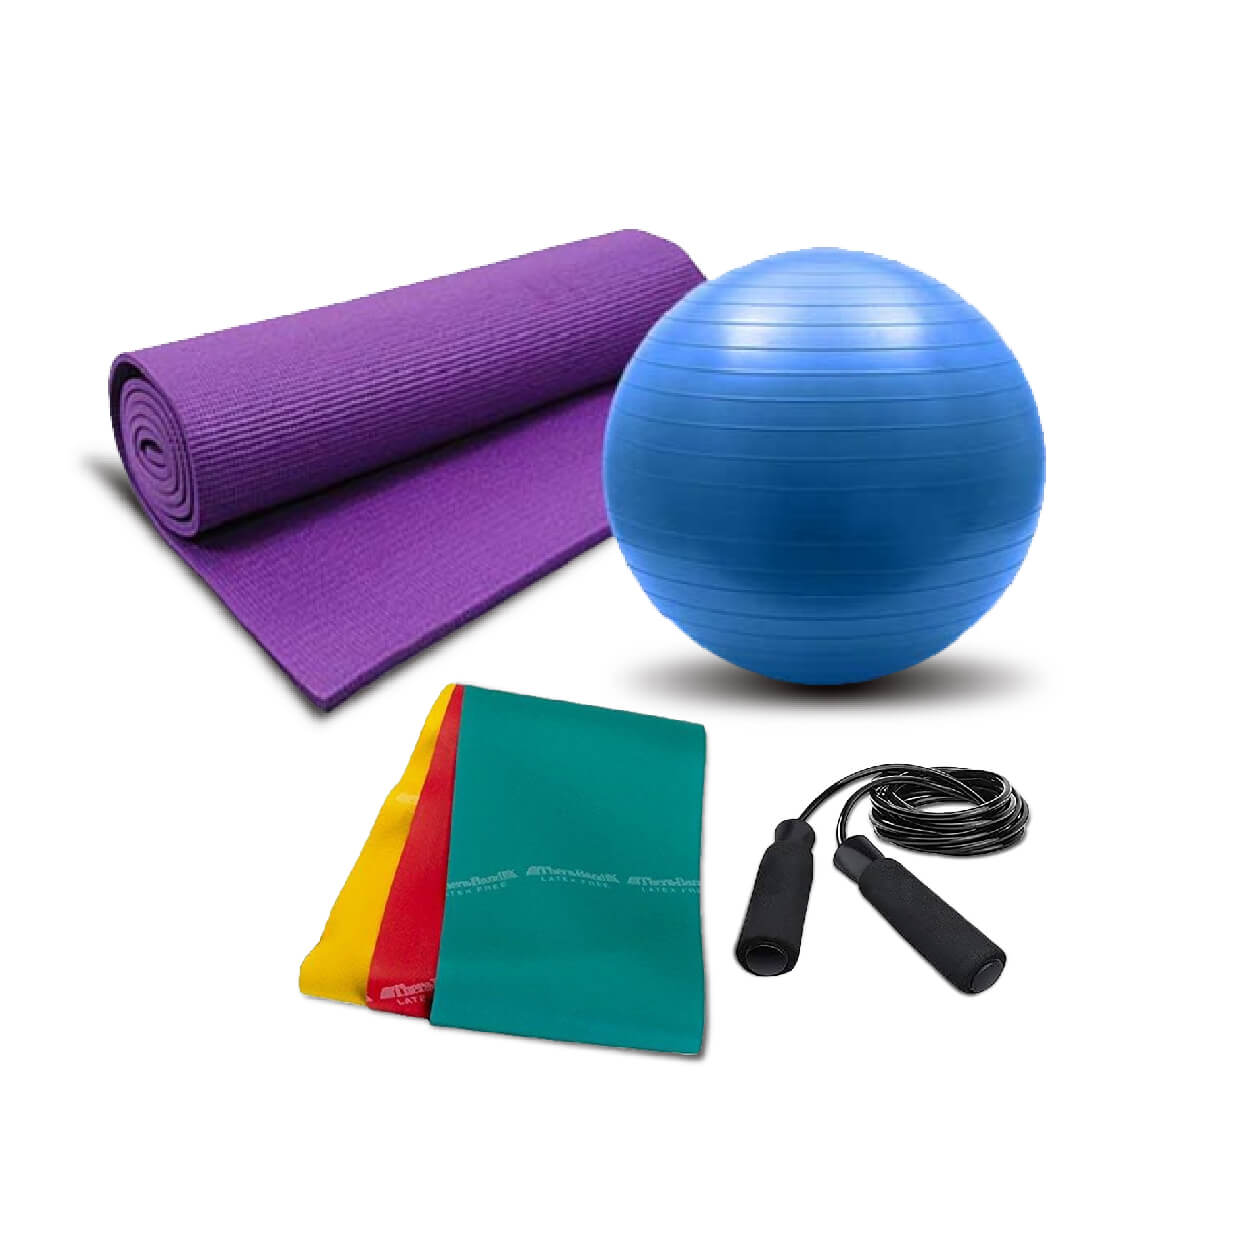 https://www.meddey.com/uploads/images/product_images/exercise-gym/1594917984_yoga-mat-gym-ball-therband-skipping_rope.jpg